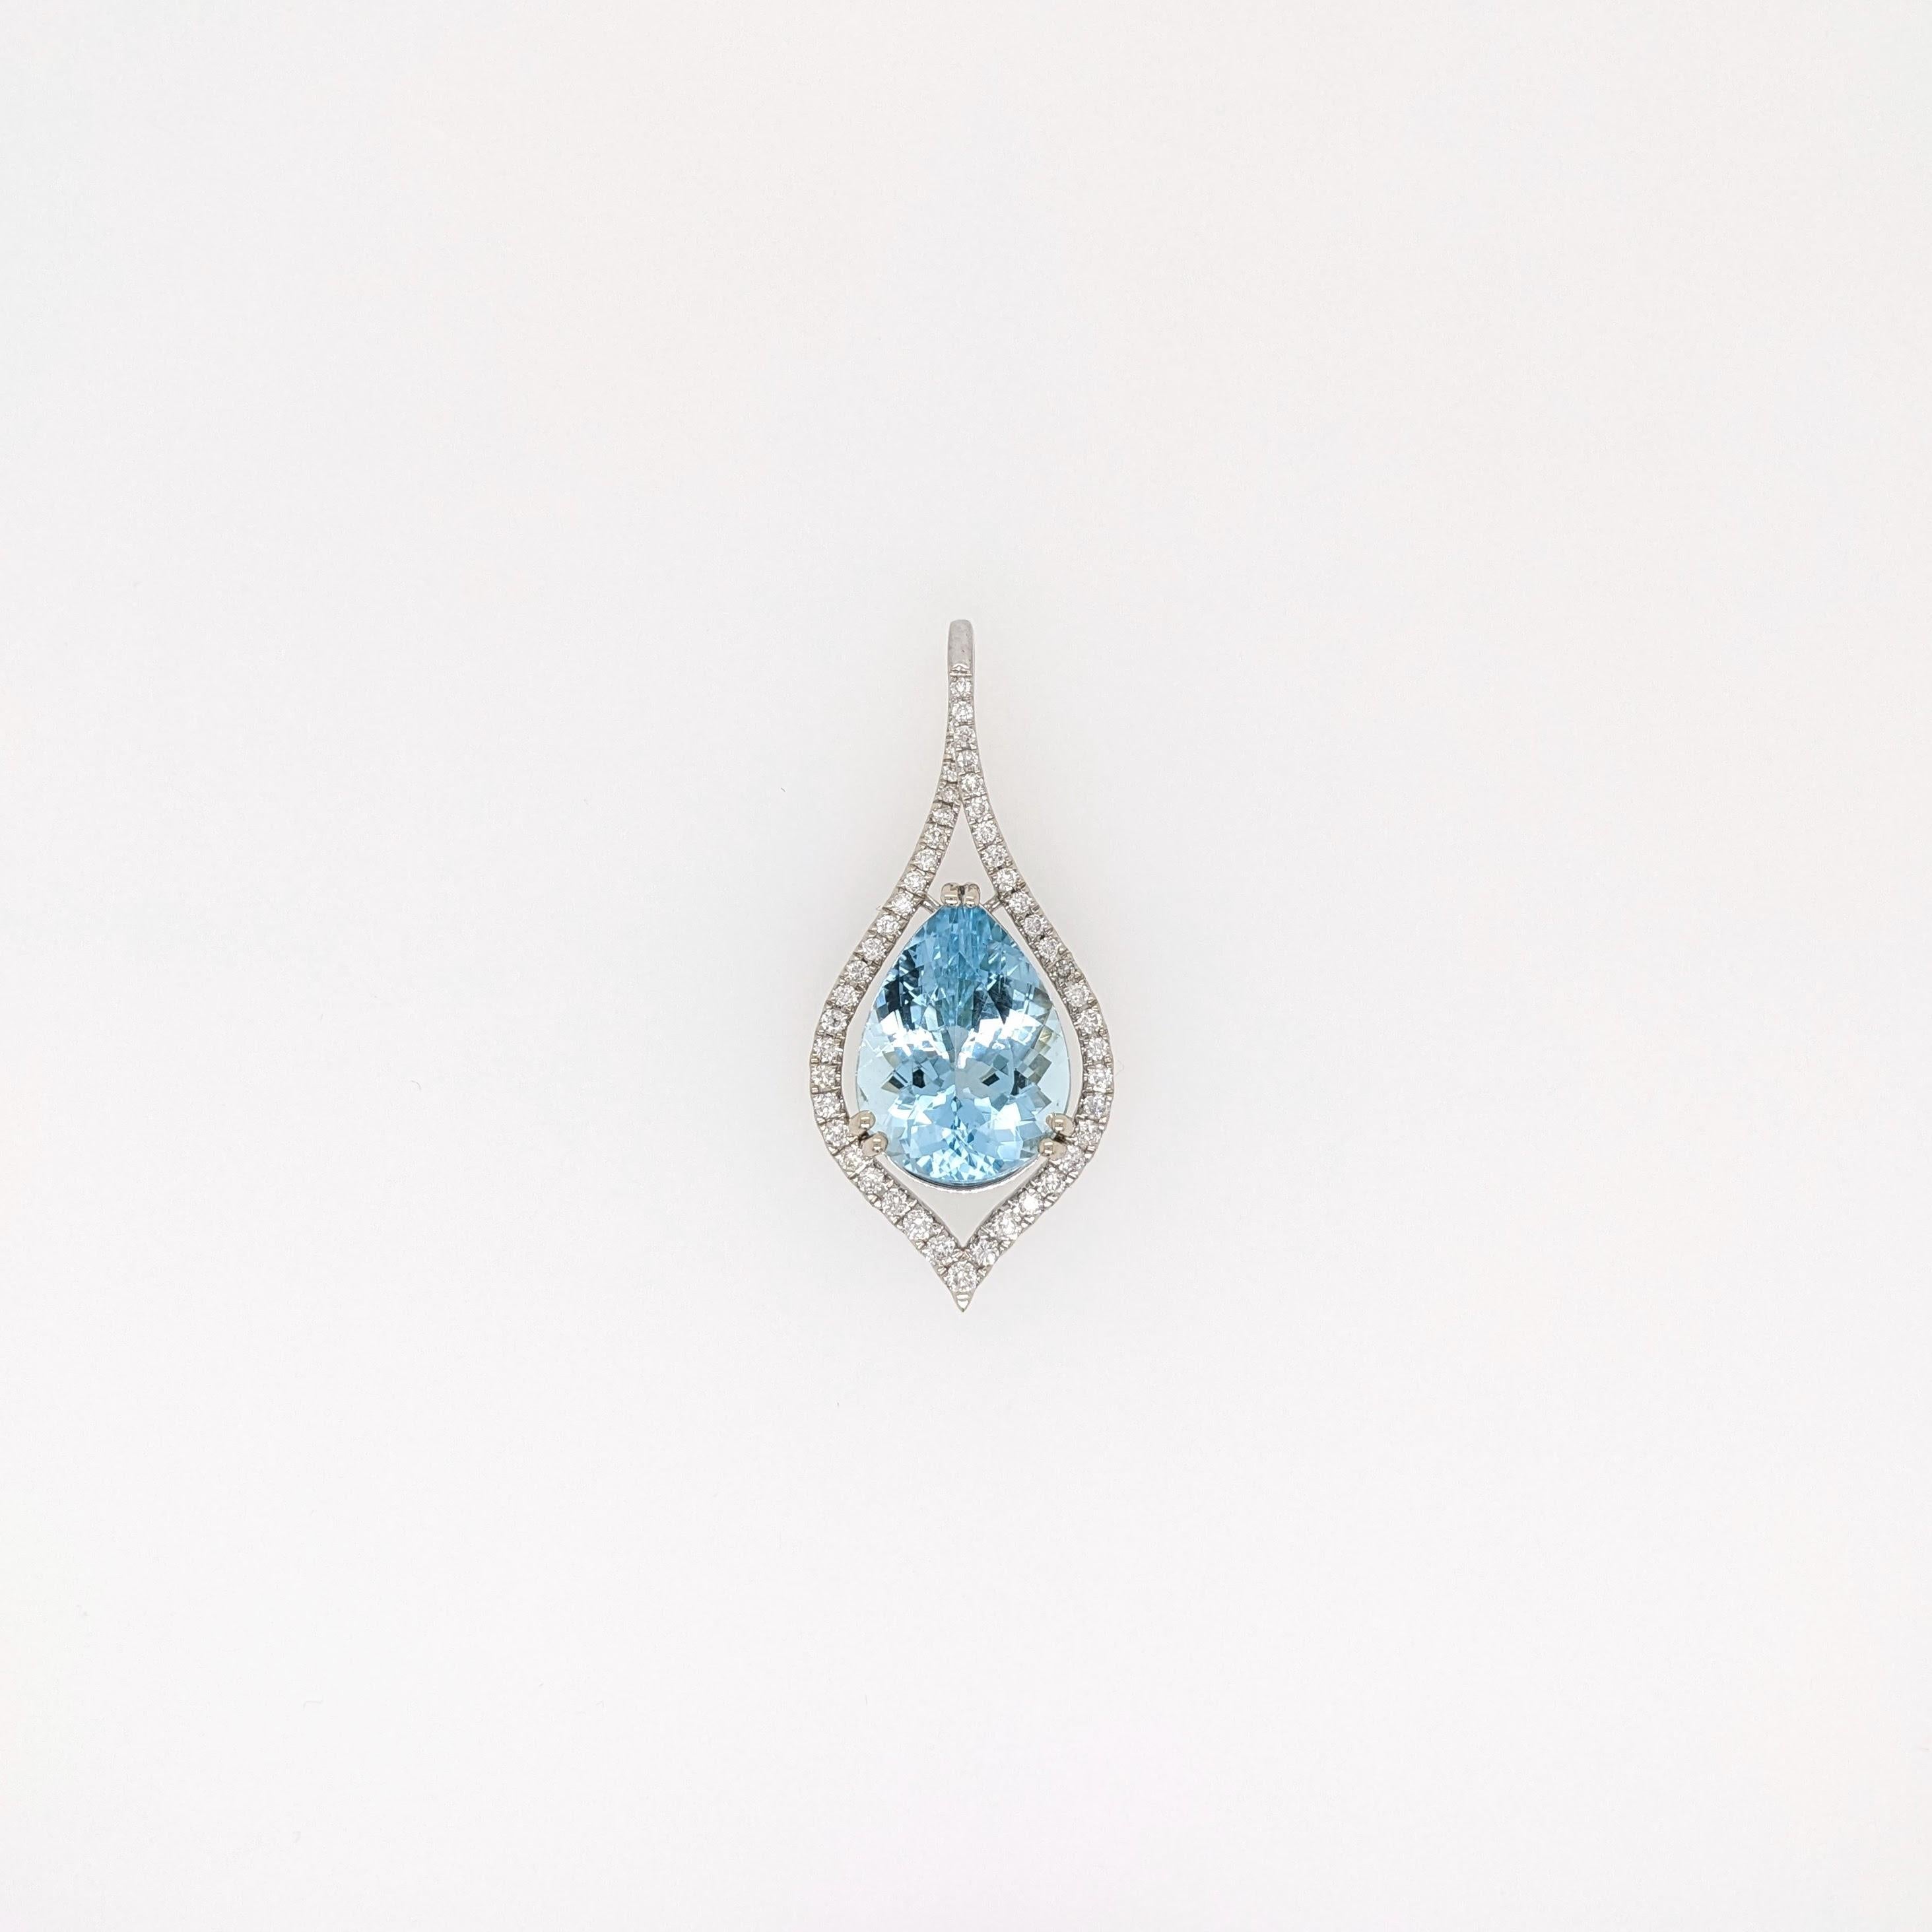 Santa Maria Aquamarines are rare and coveted gemstones. This gorgeous pendant showcases a large 8 carat pear cut aquamarine set in a diamond accented pendant in 14k white gold.

Specifications:

Item Type: Pendant
Center Stone: Santa Maria